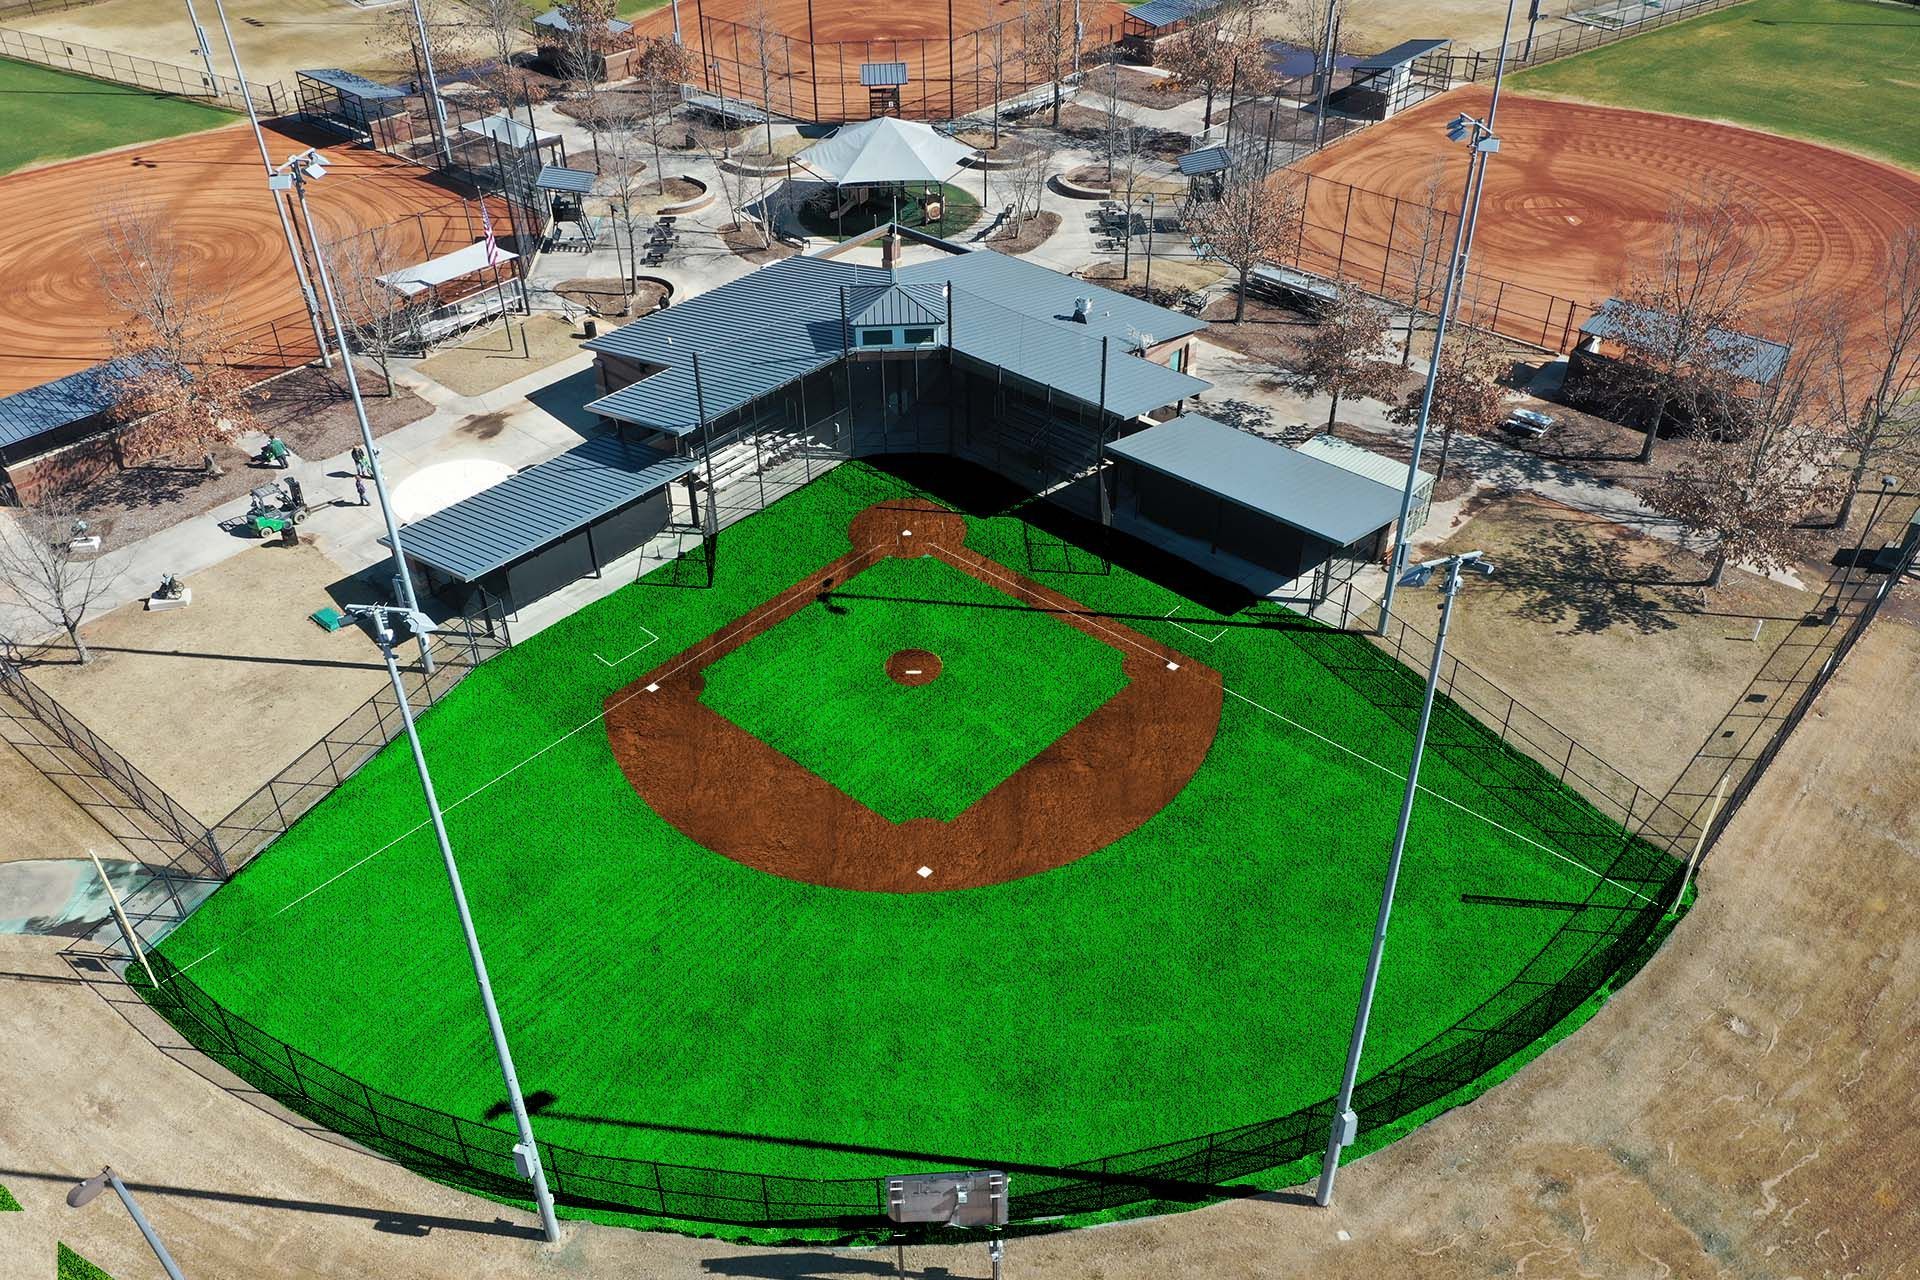 an aerial view of a baseball field with artificial turf and dirt